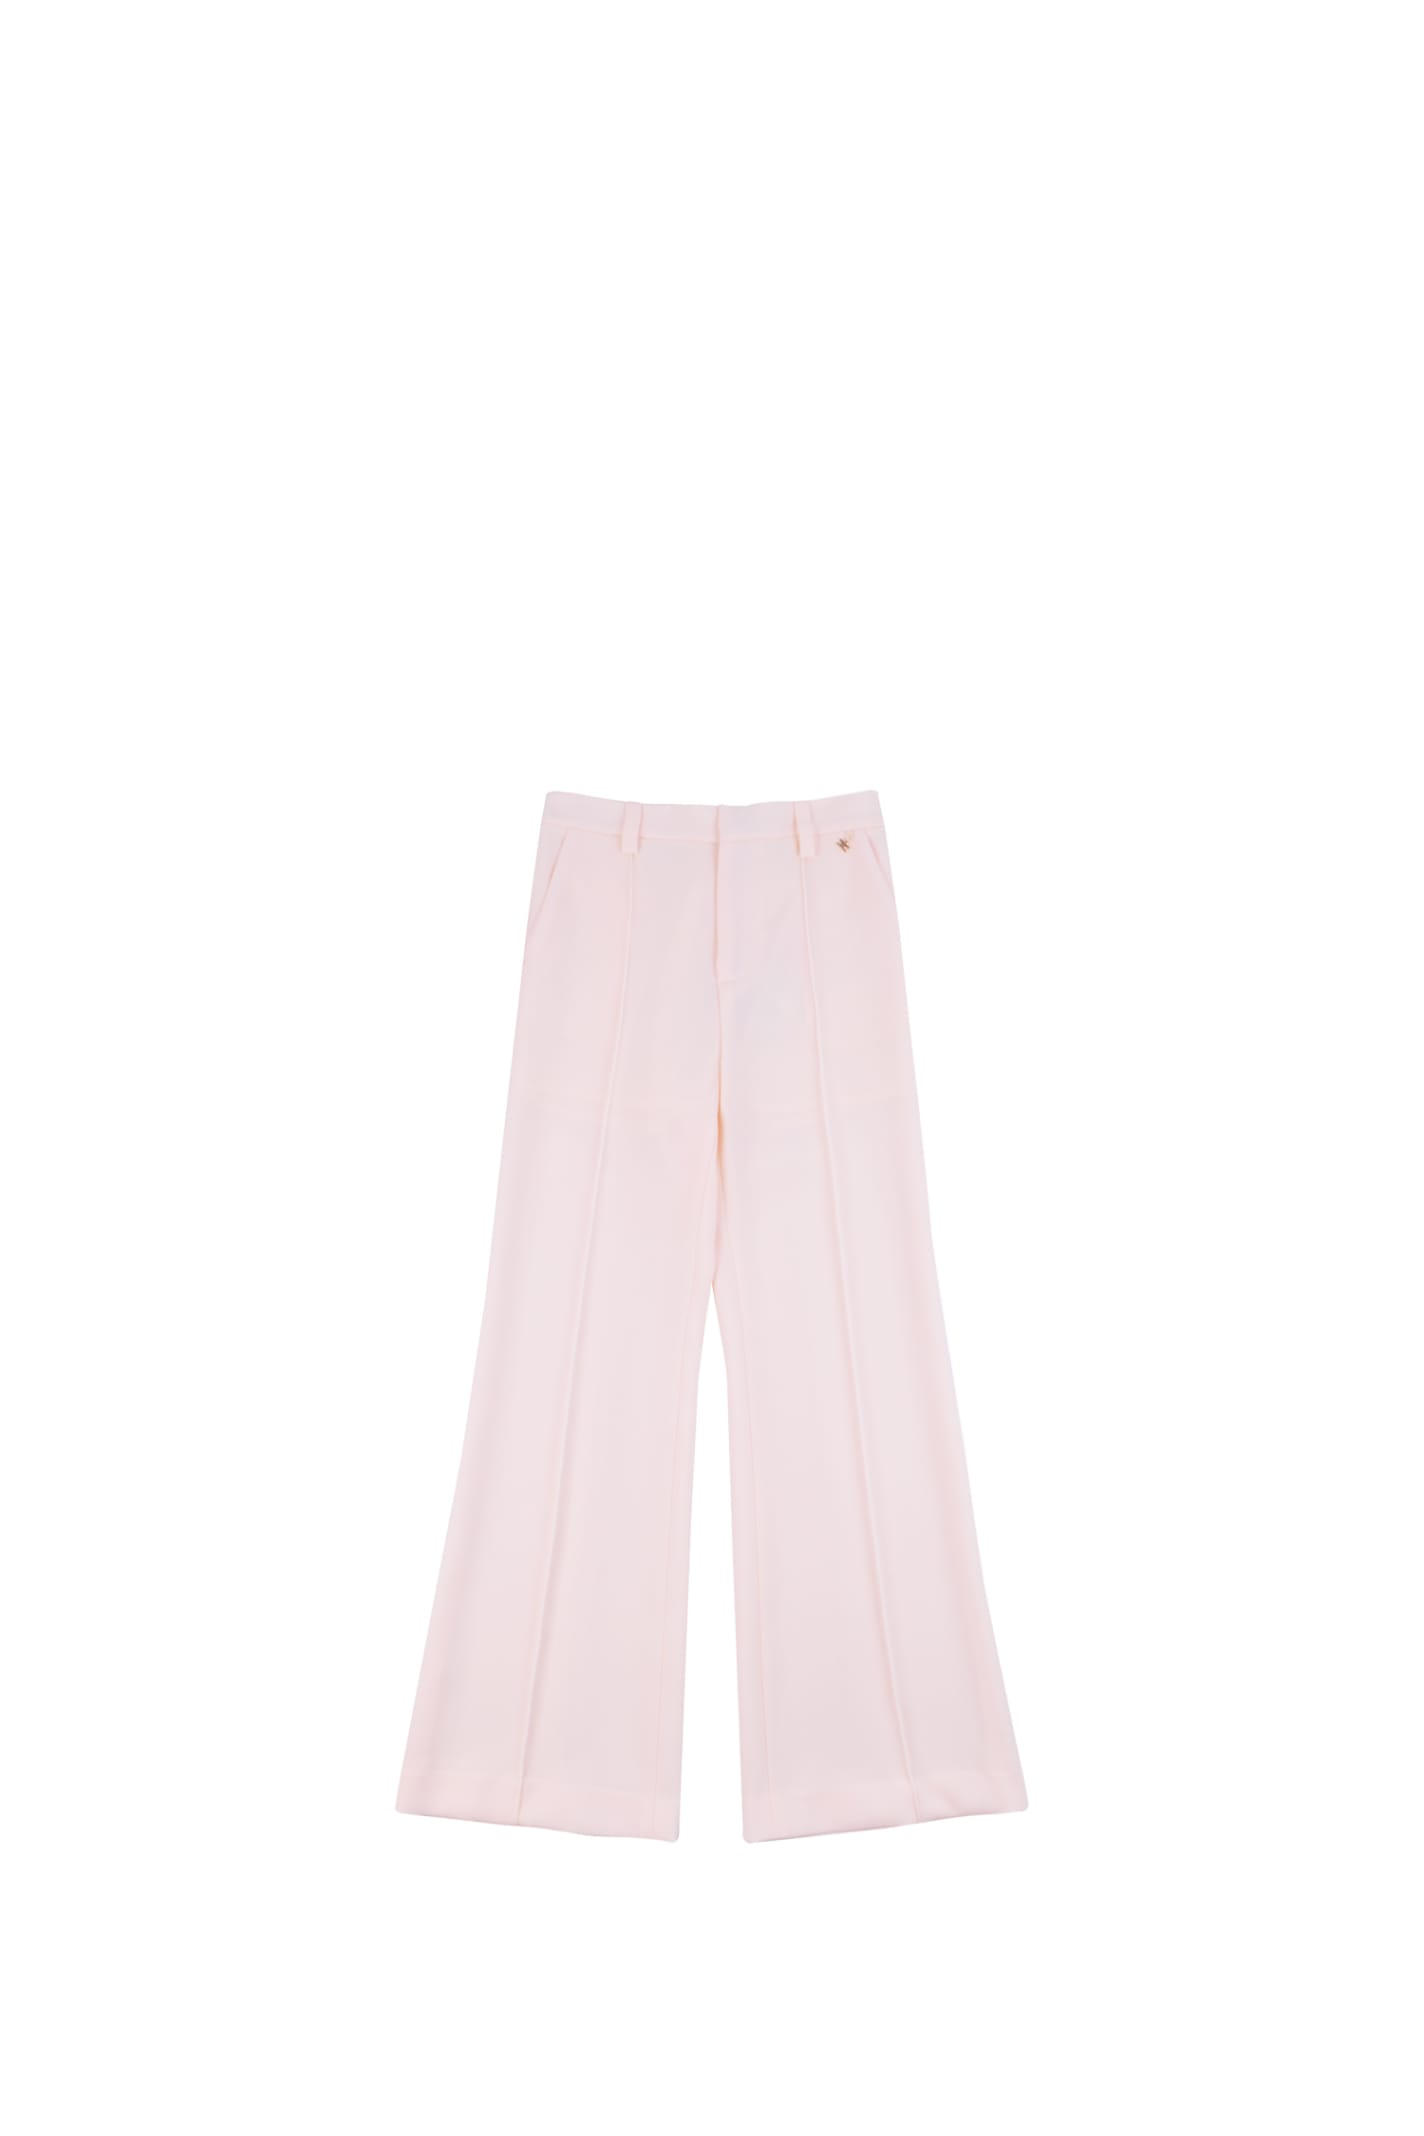 Elisabetta Franchi Kids' Pants With Flared Leg In White